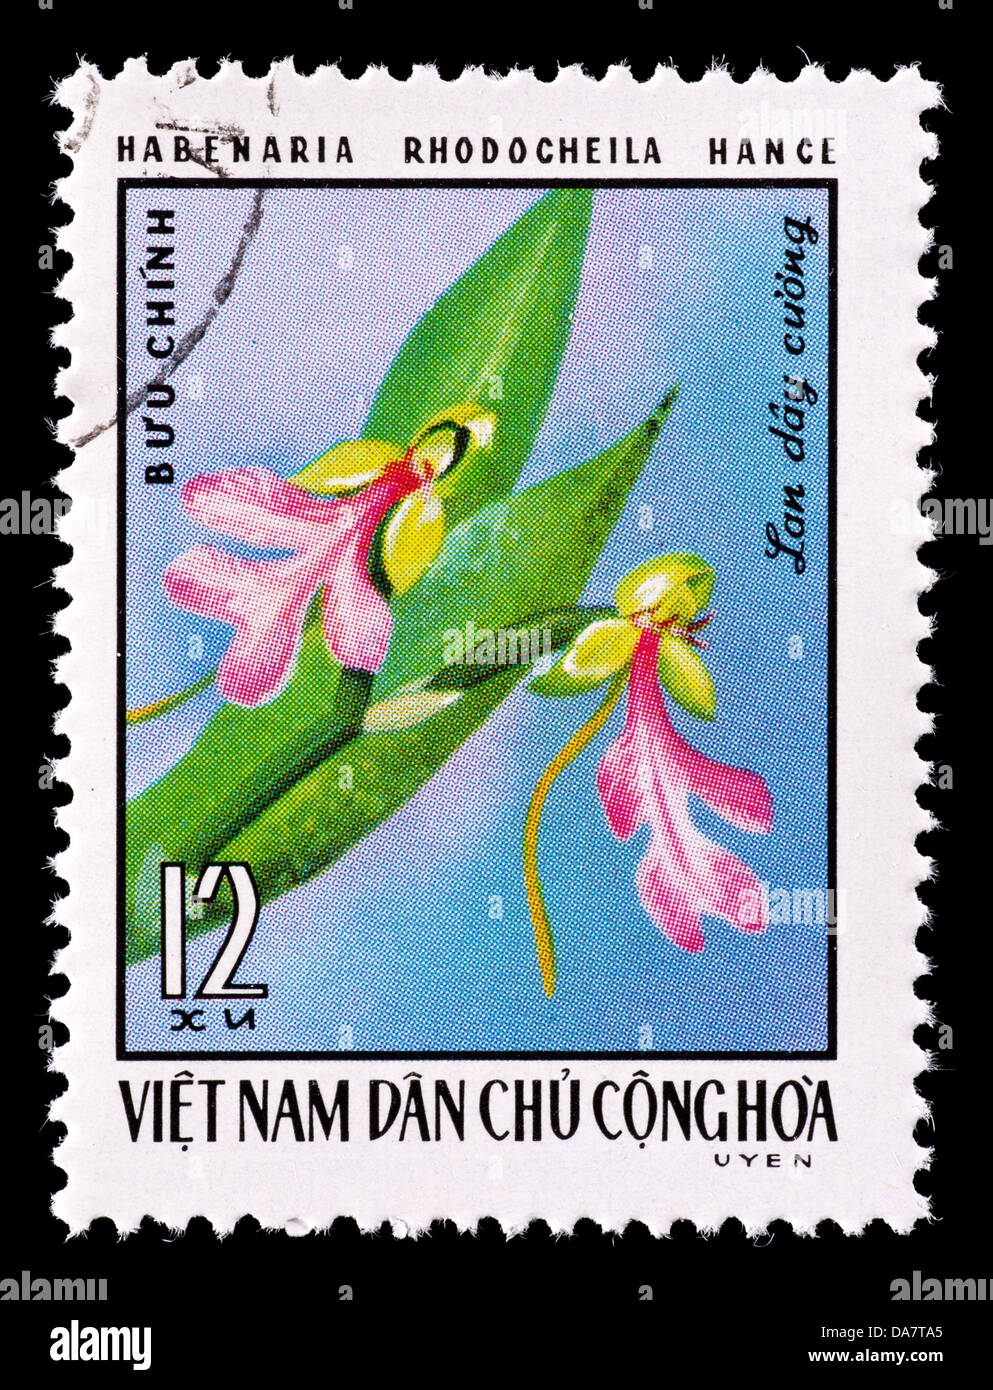 Postage stamp from Vietnam depicting the red-lipped Habenaria (Habenaria rhodocheila). Stock Photo